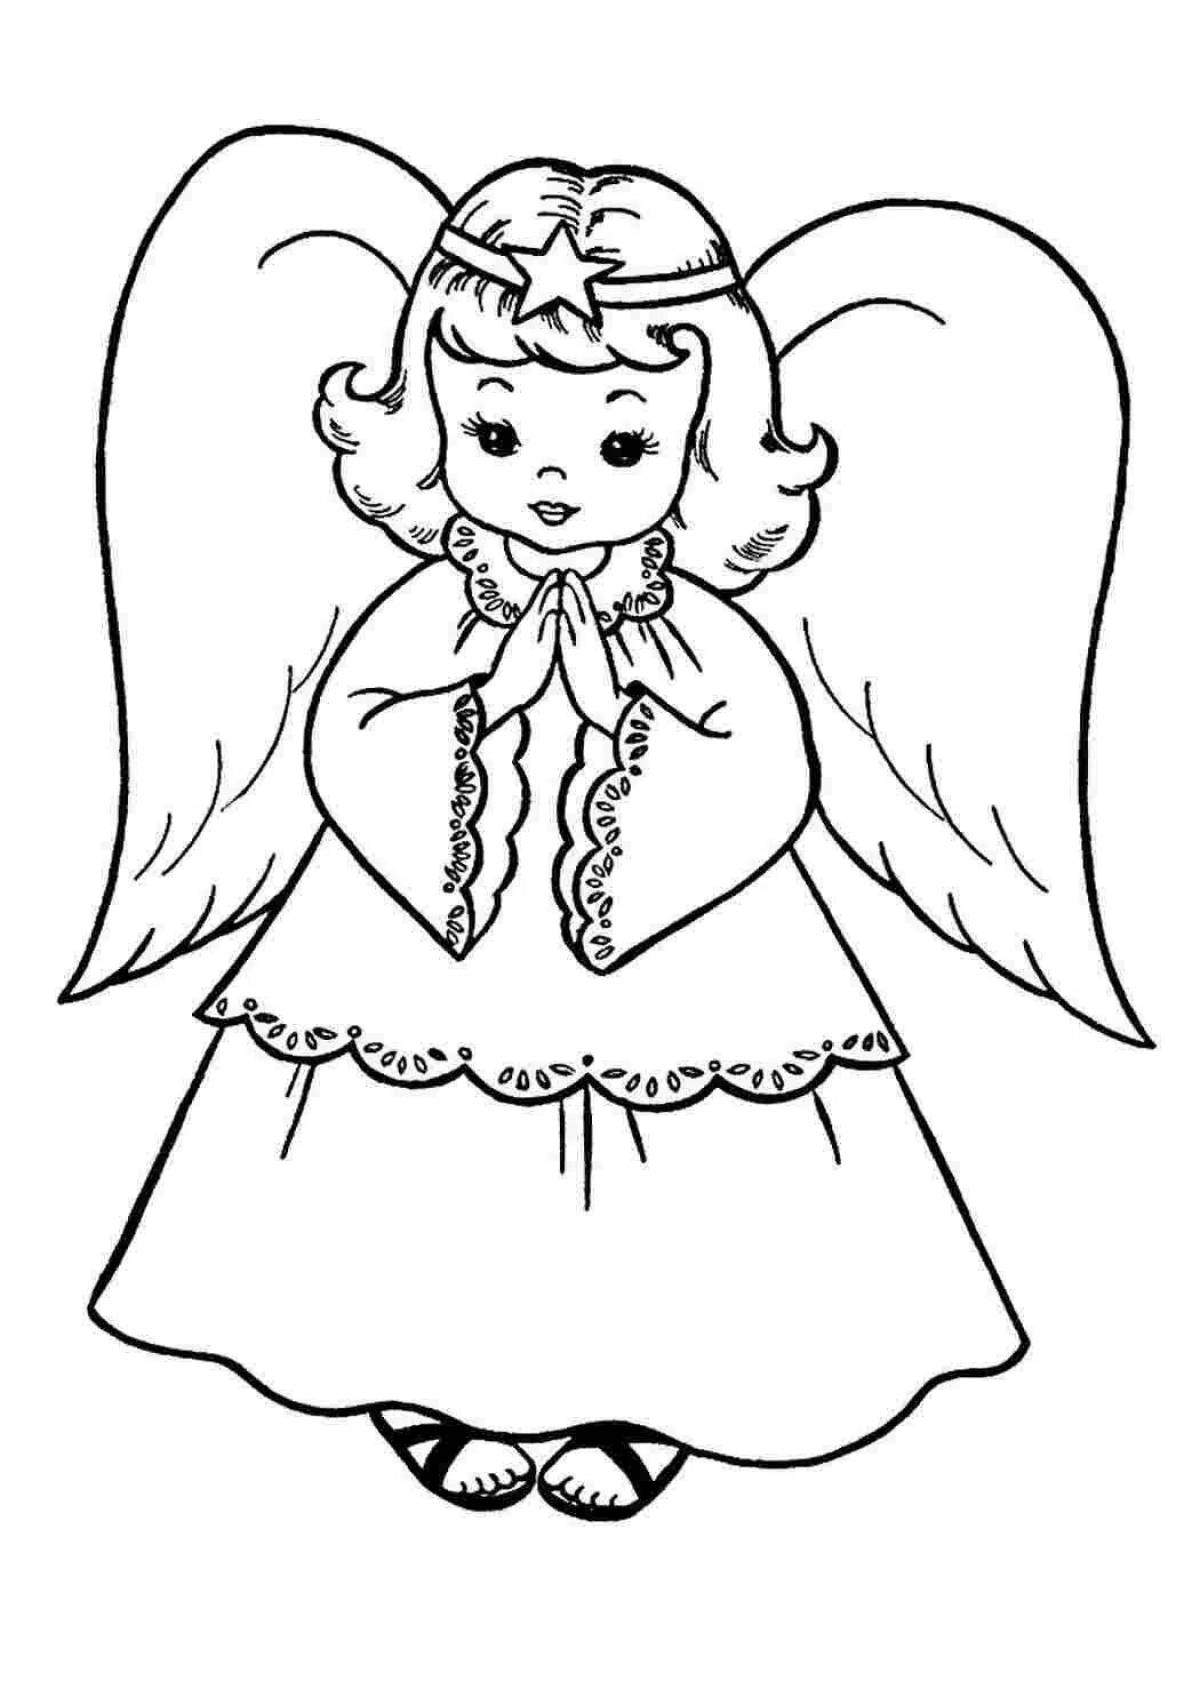 Coloring book angel with heavenly illumination for children